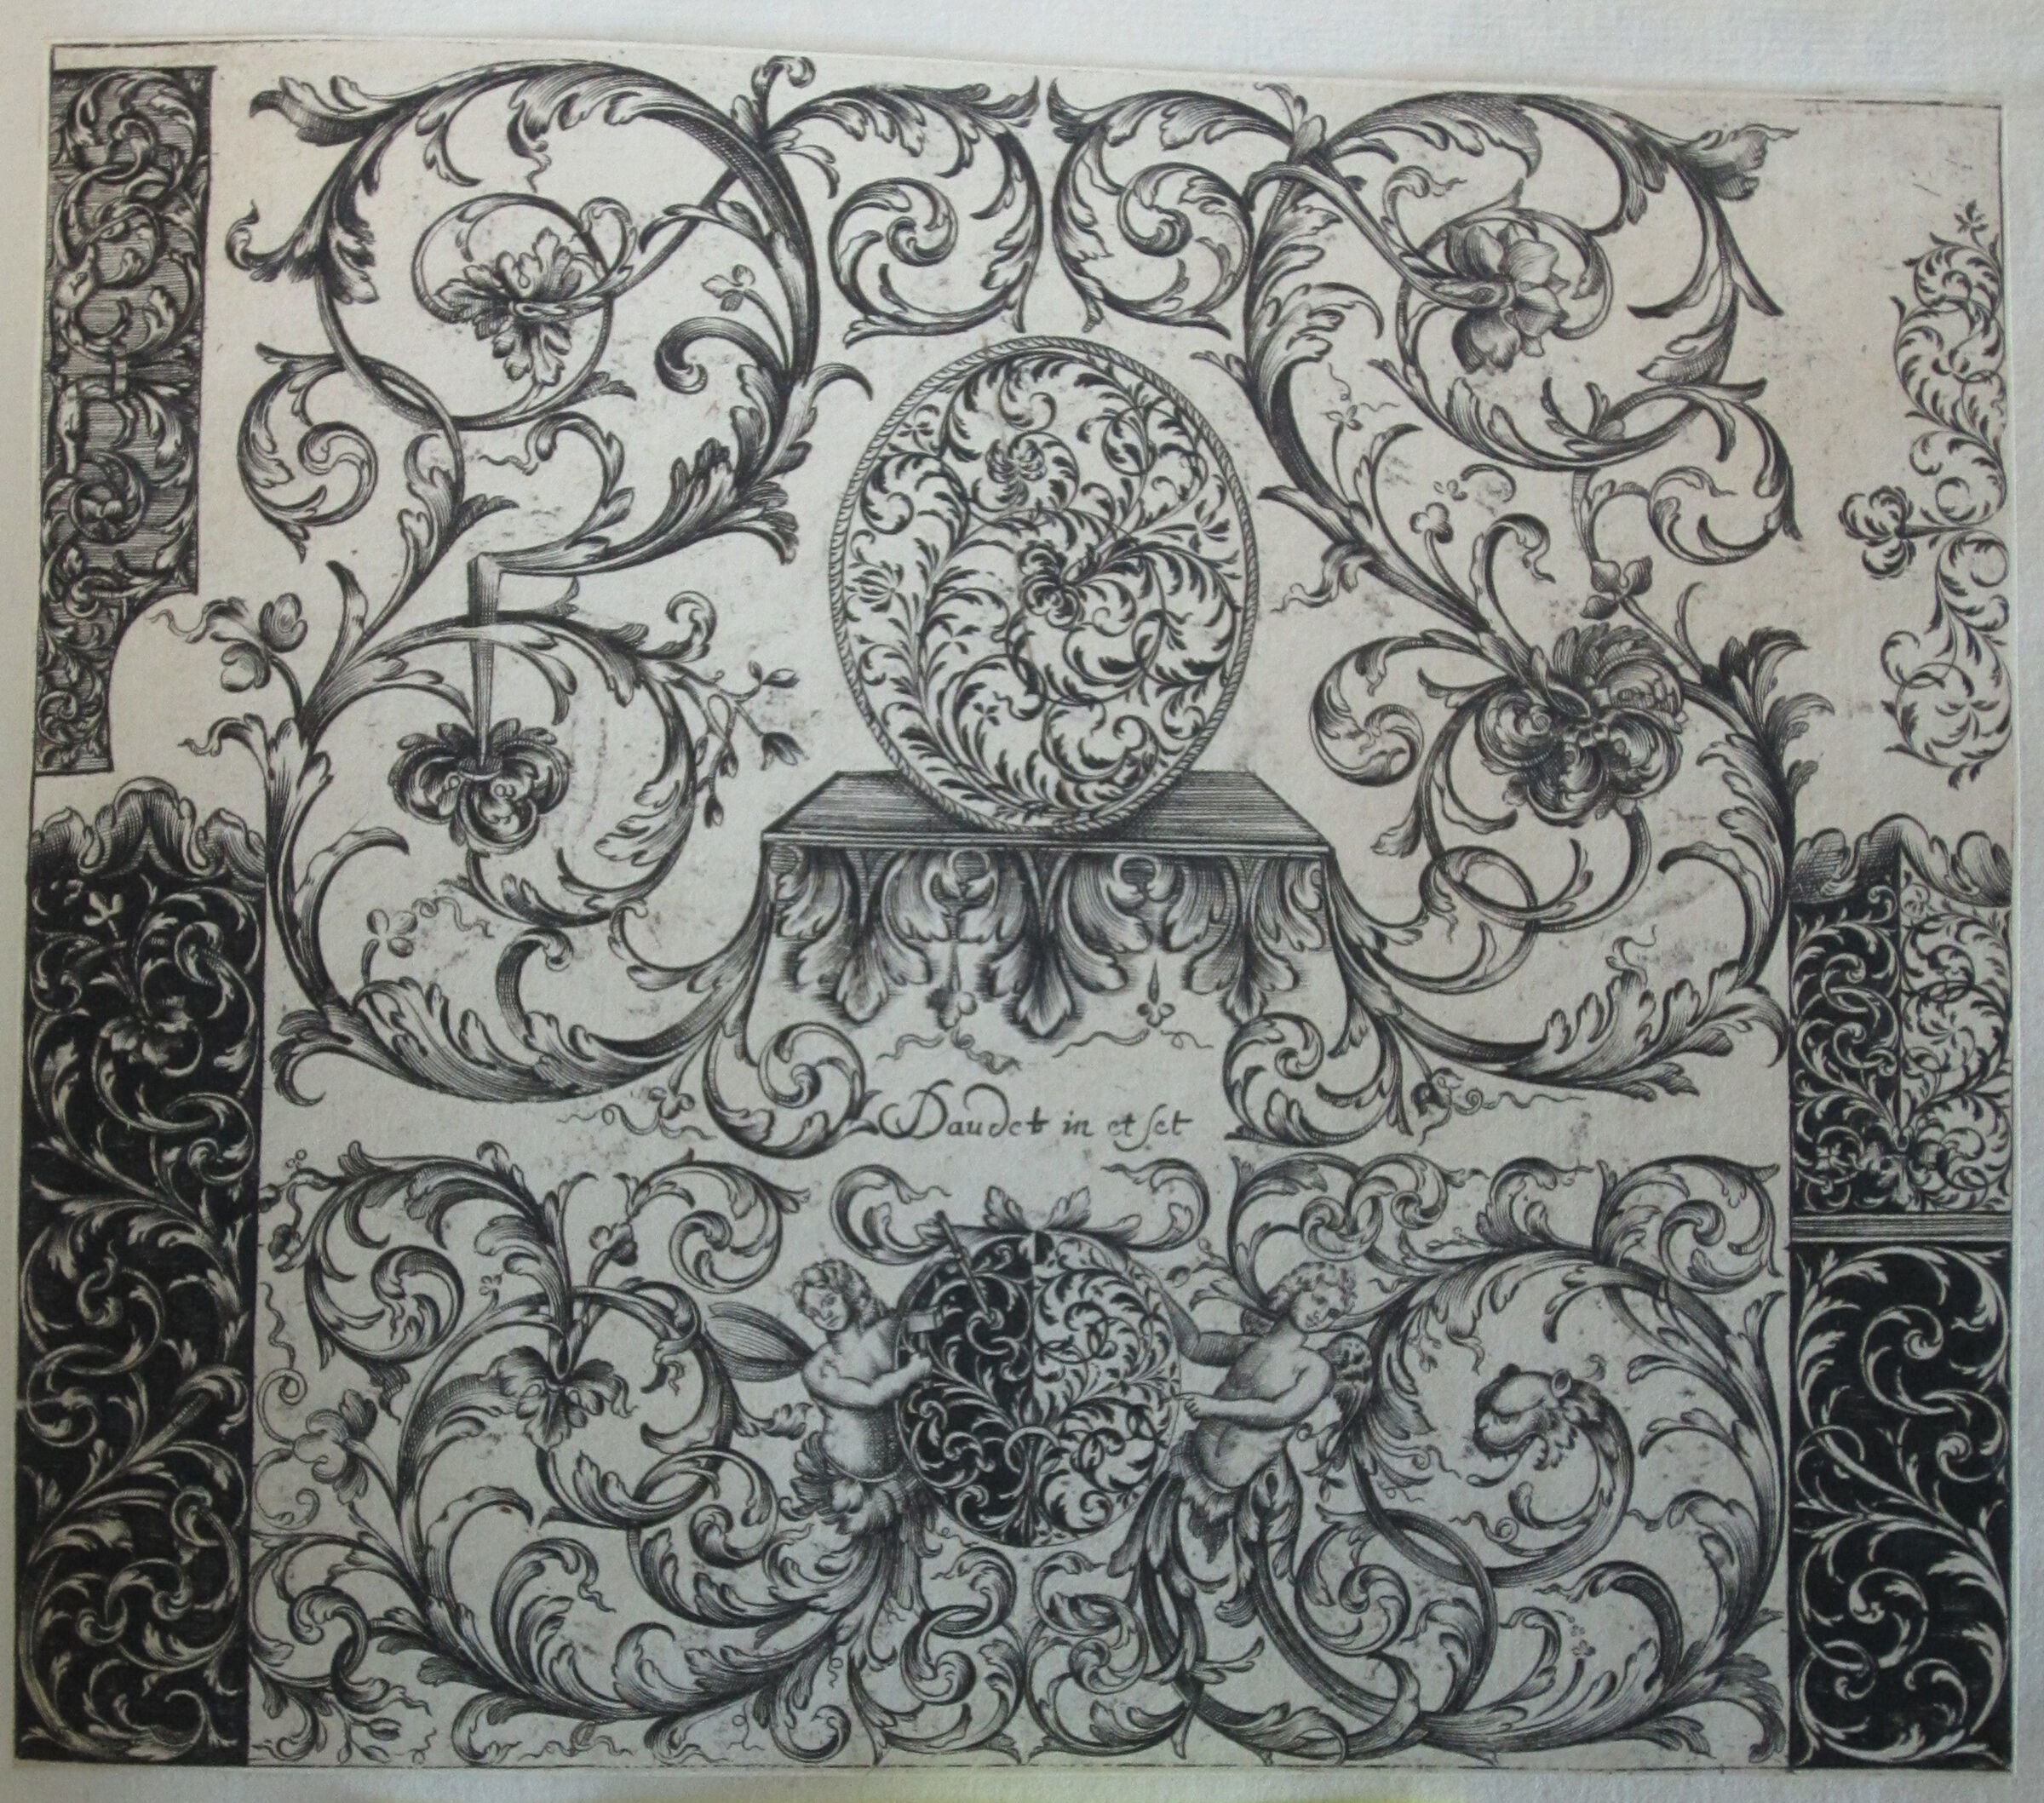 Six Moresque Designs, The Lower Left Border And The Lower Extent Of The Lower Right Border With Dark Backgrounds